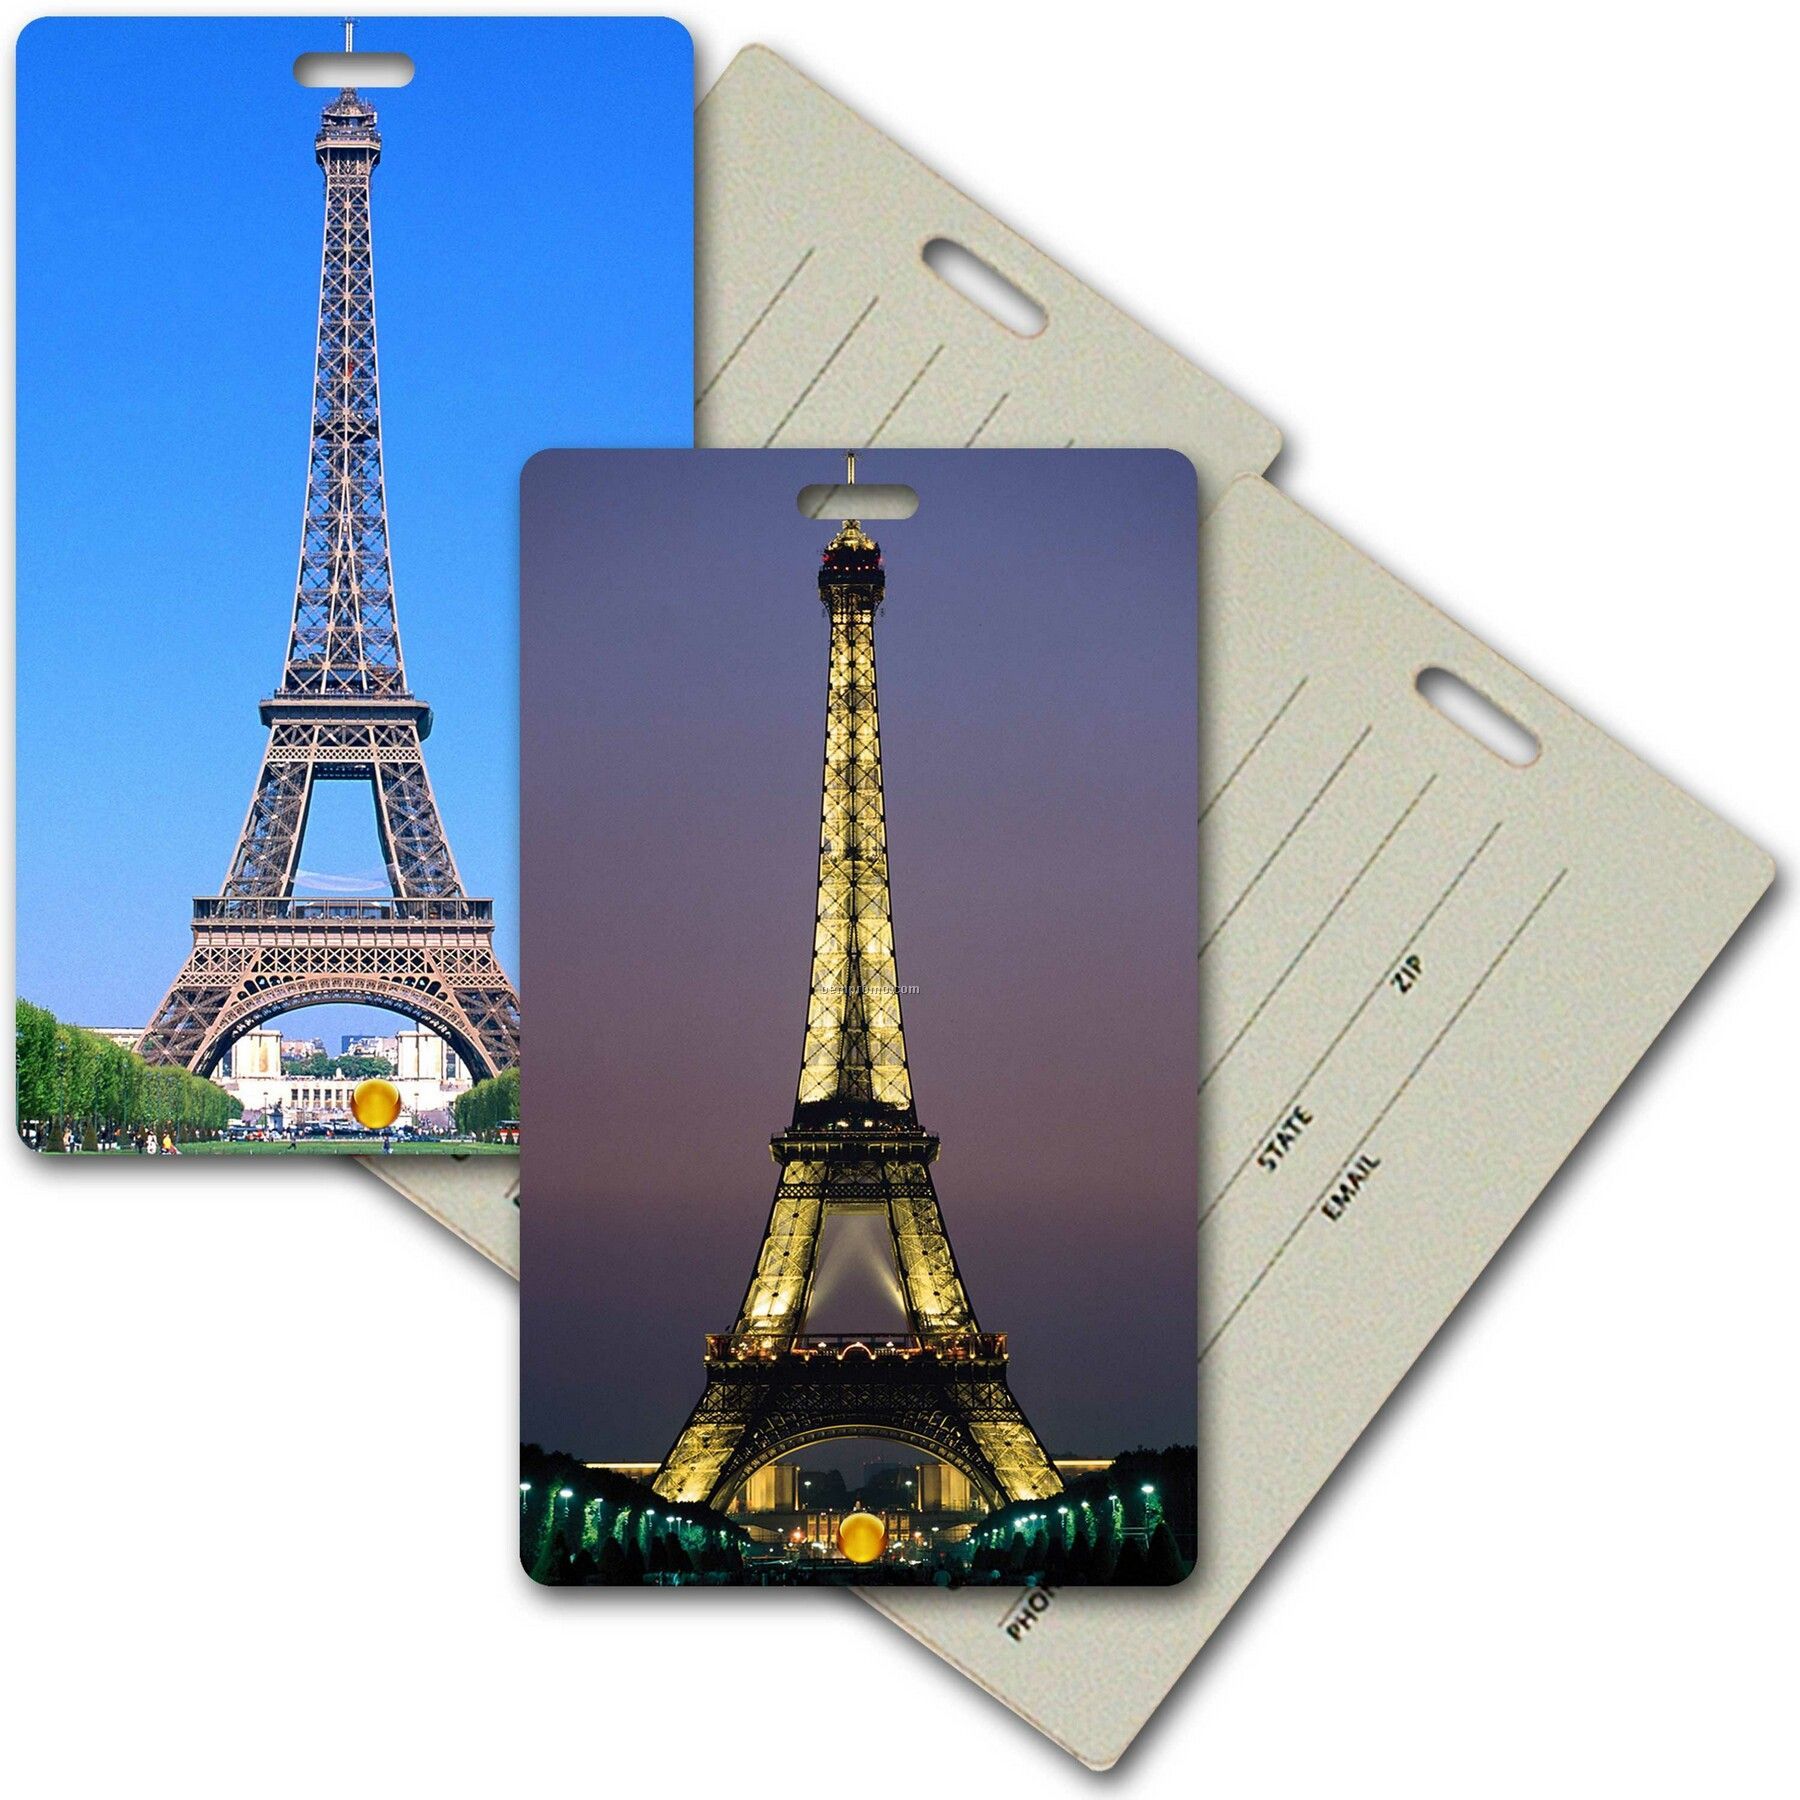 Privacy Tag W/3d Lenticular Images Of The Eiffel Tower (Blanks)